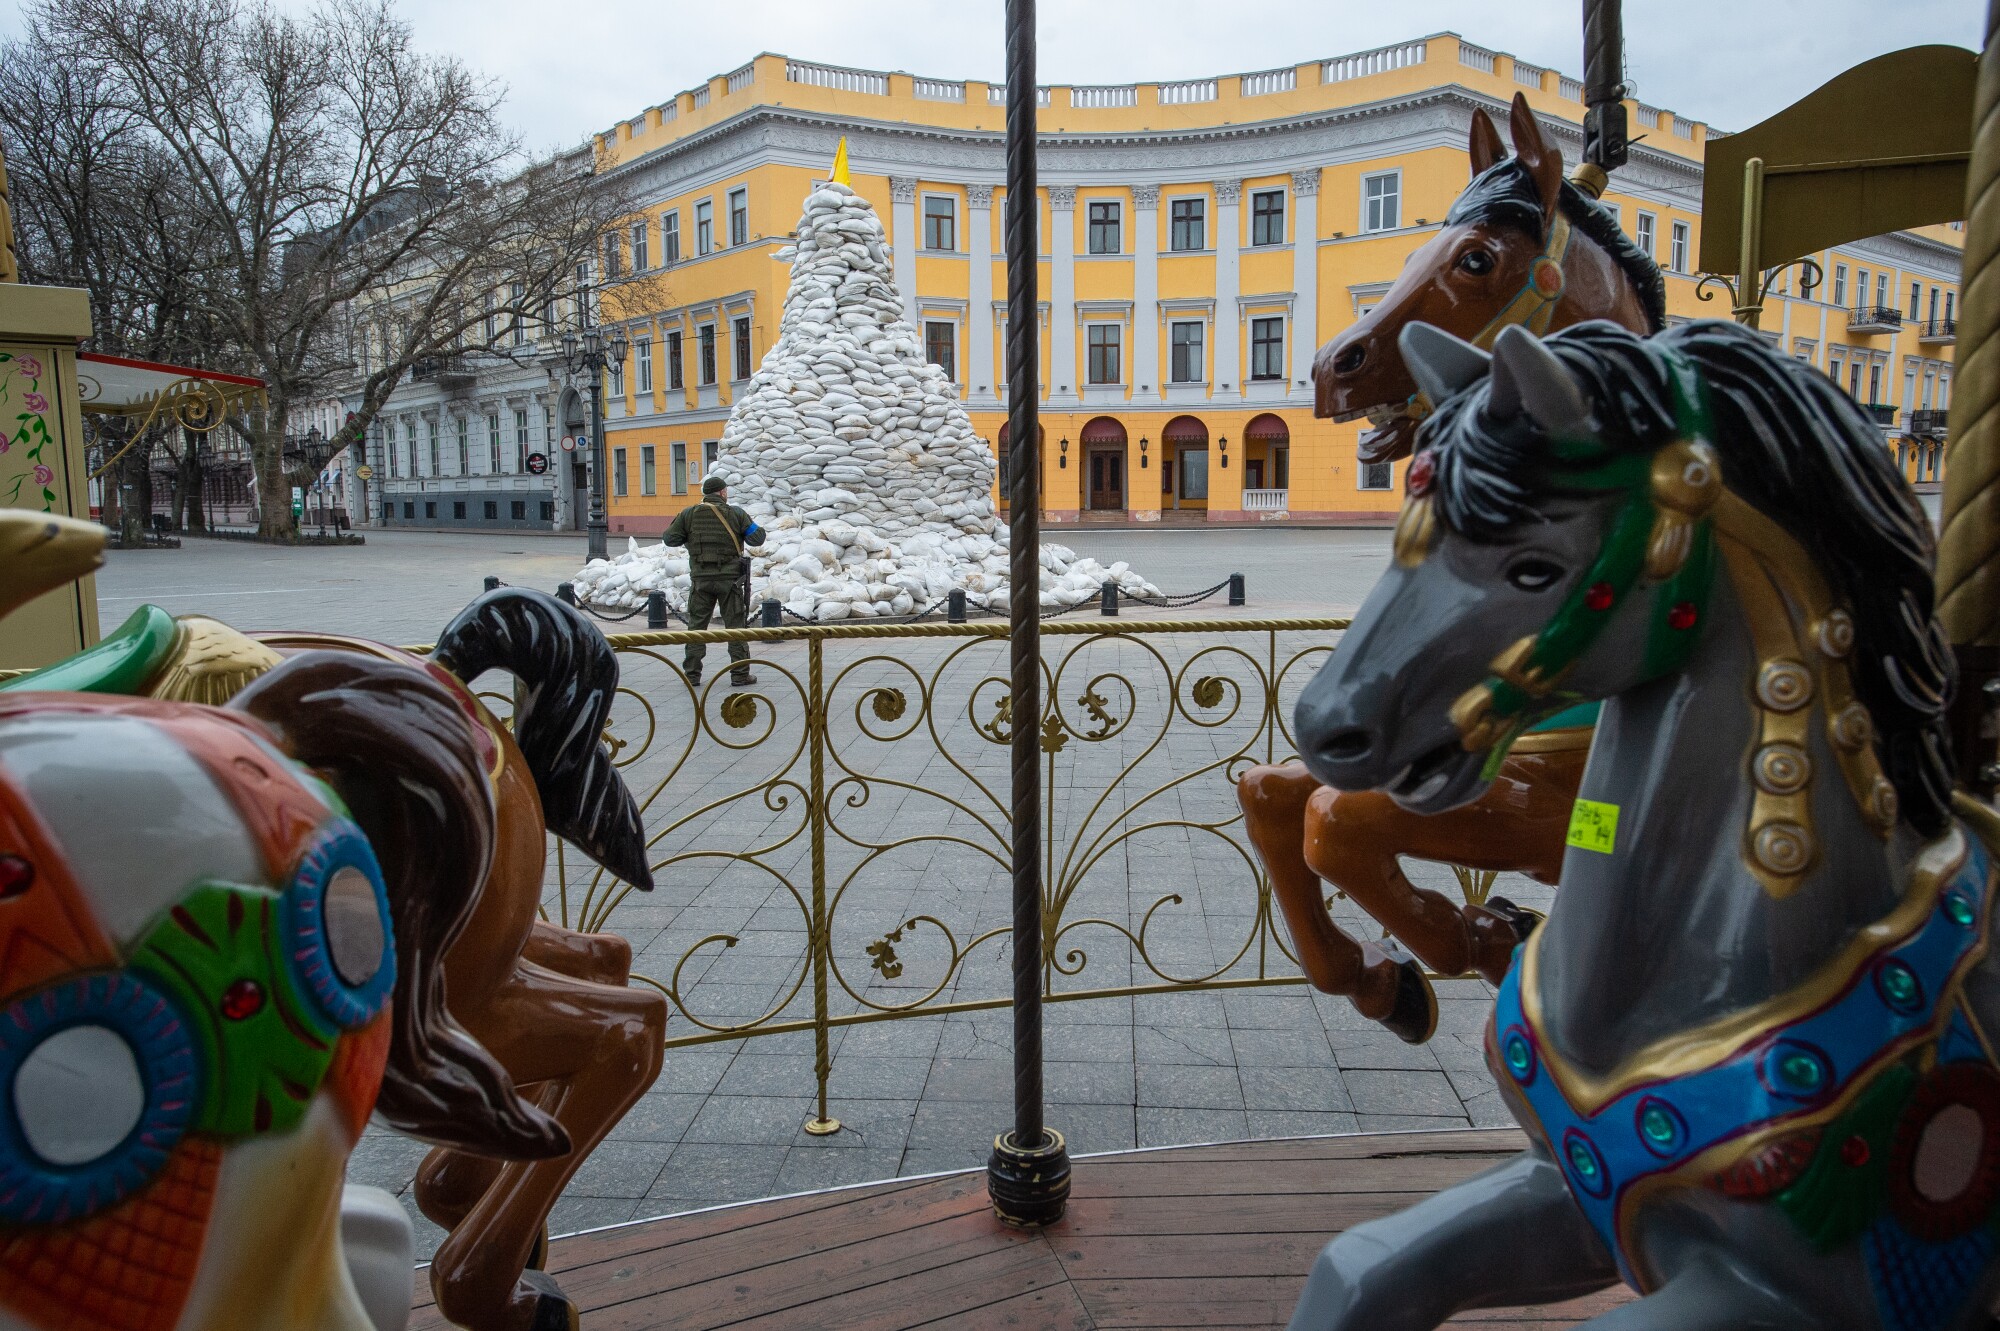 Carousel horses with sandbags in the background.